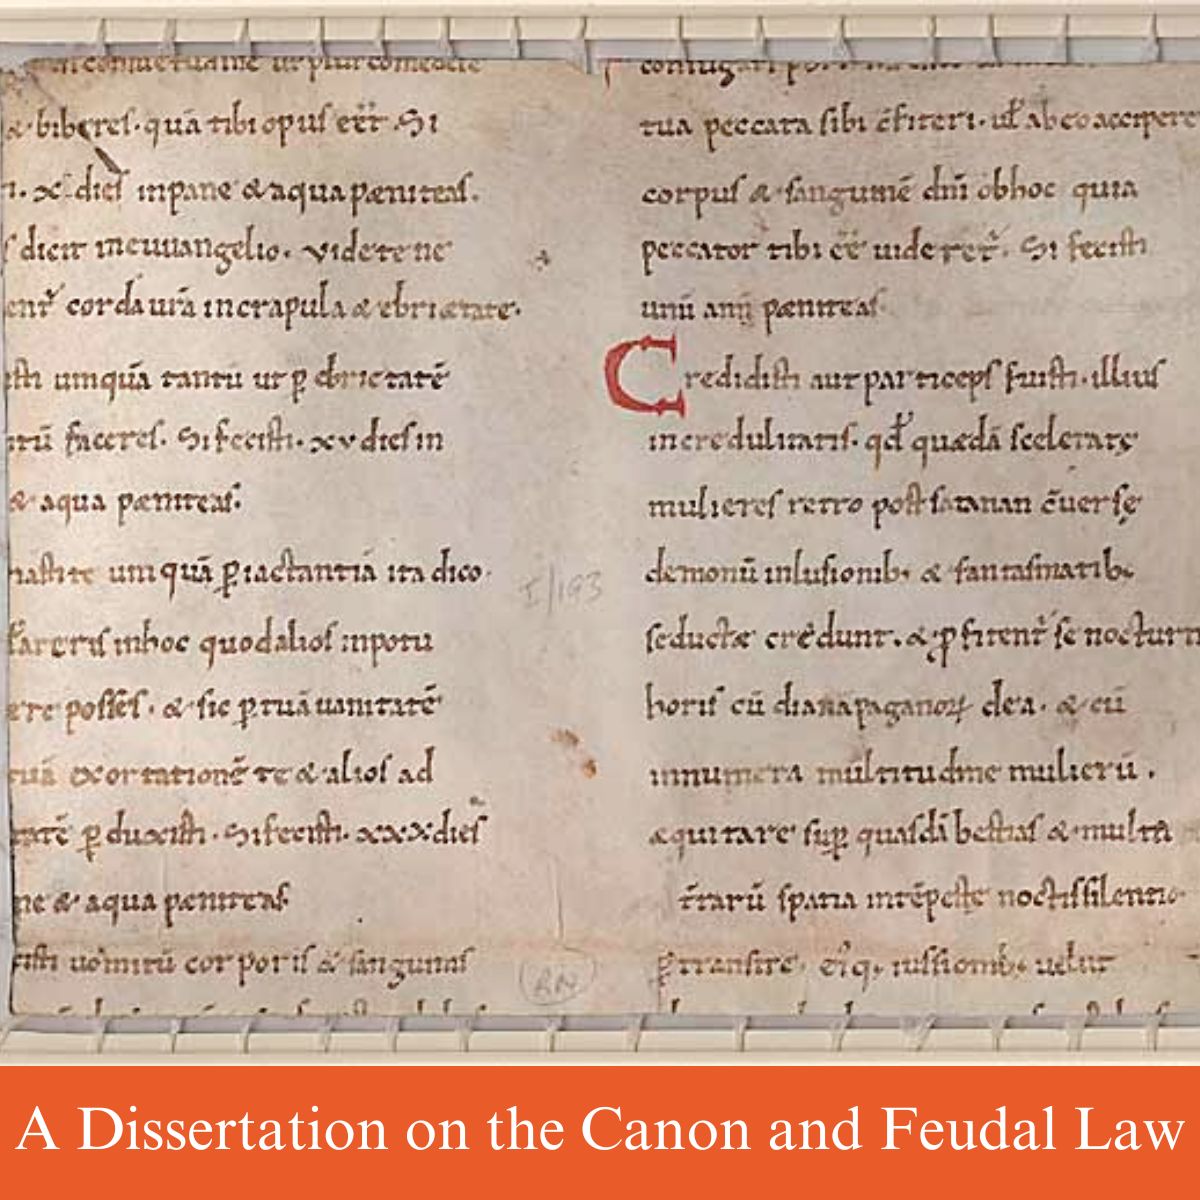 a dissertation on canon and feudal law sat